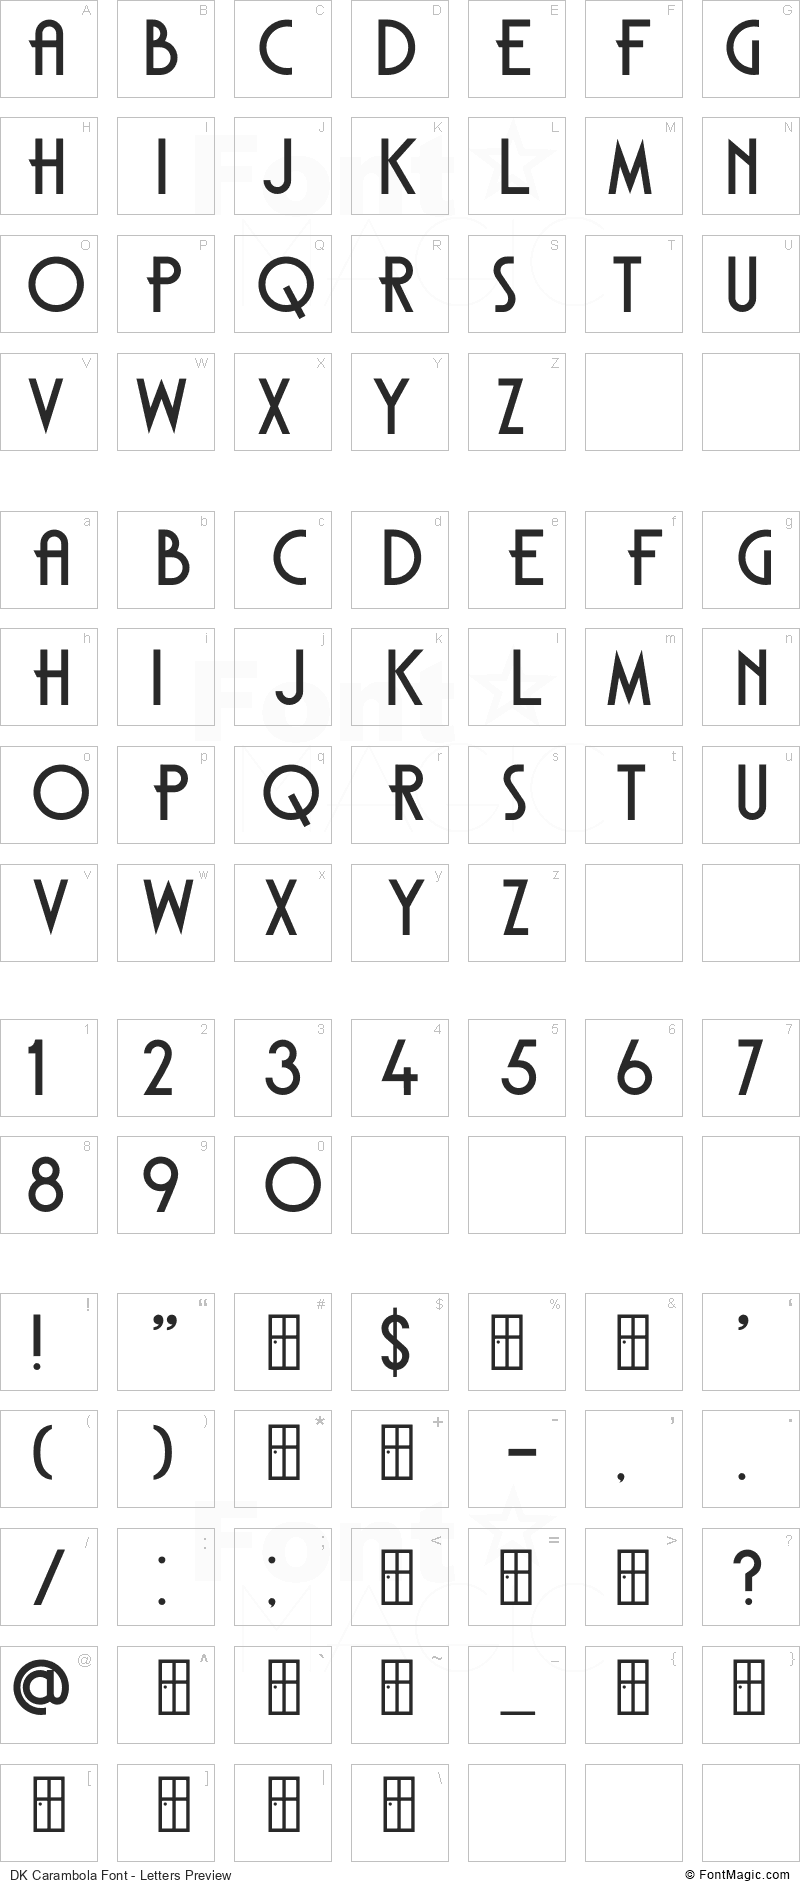 DK Carambola Font - All Latters Preview Chart